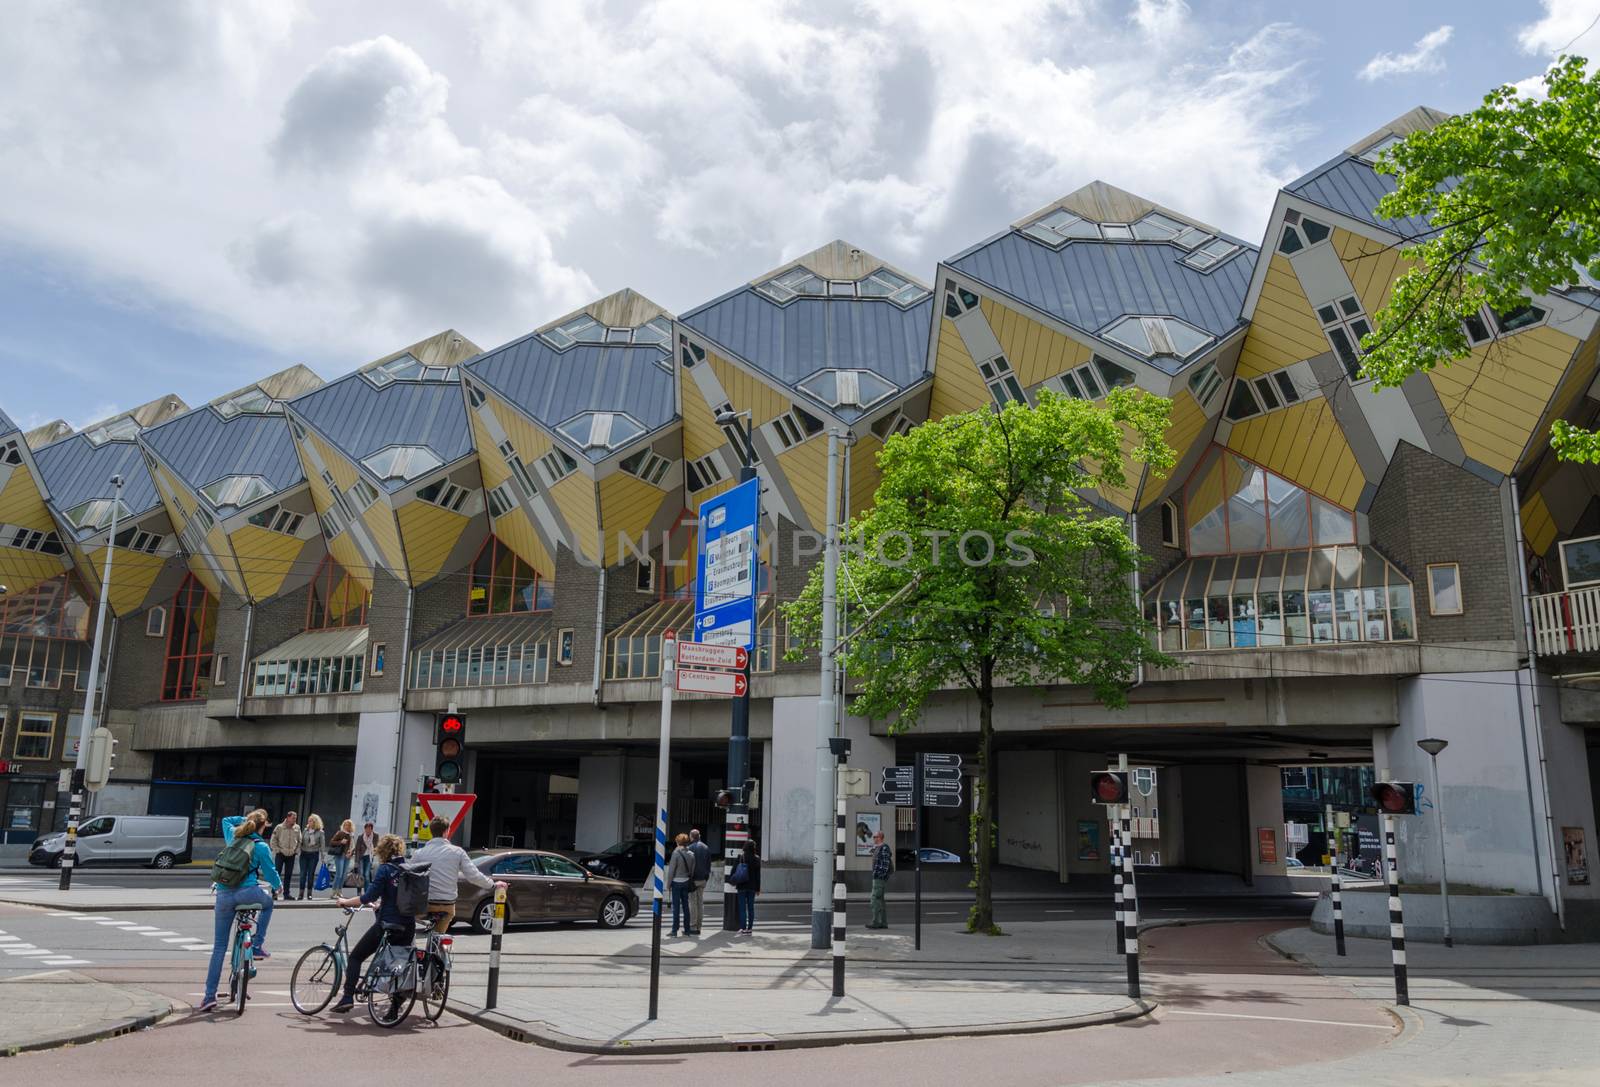 Rotterdam, Netherlands - May 9, 2015: Tourist visit Cube Houses in Rotterdam by siraanamwong